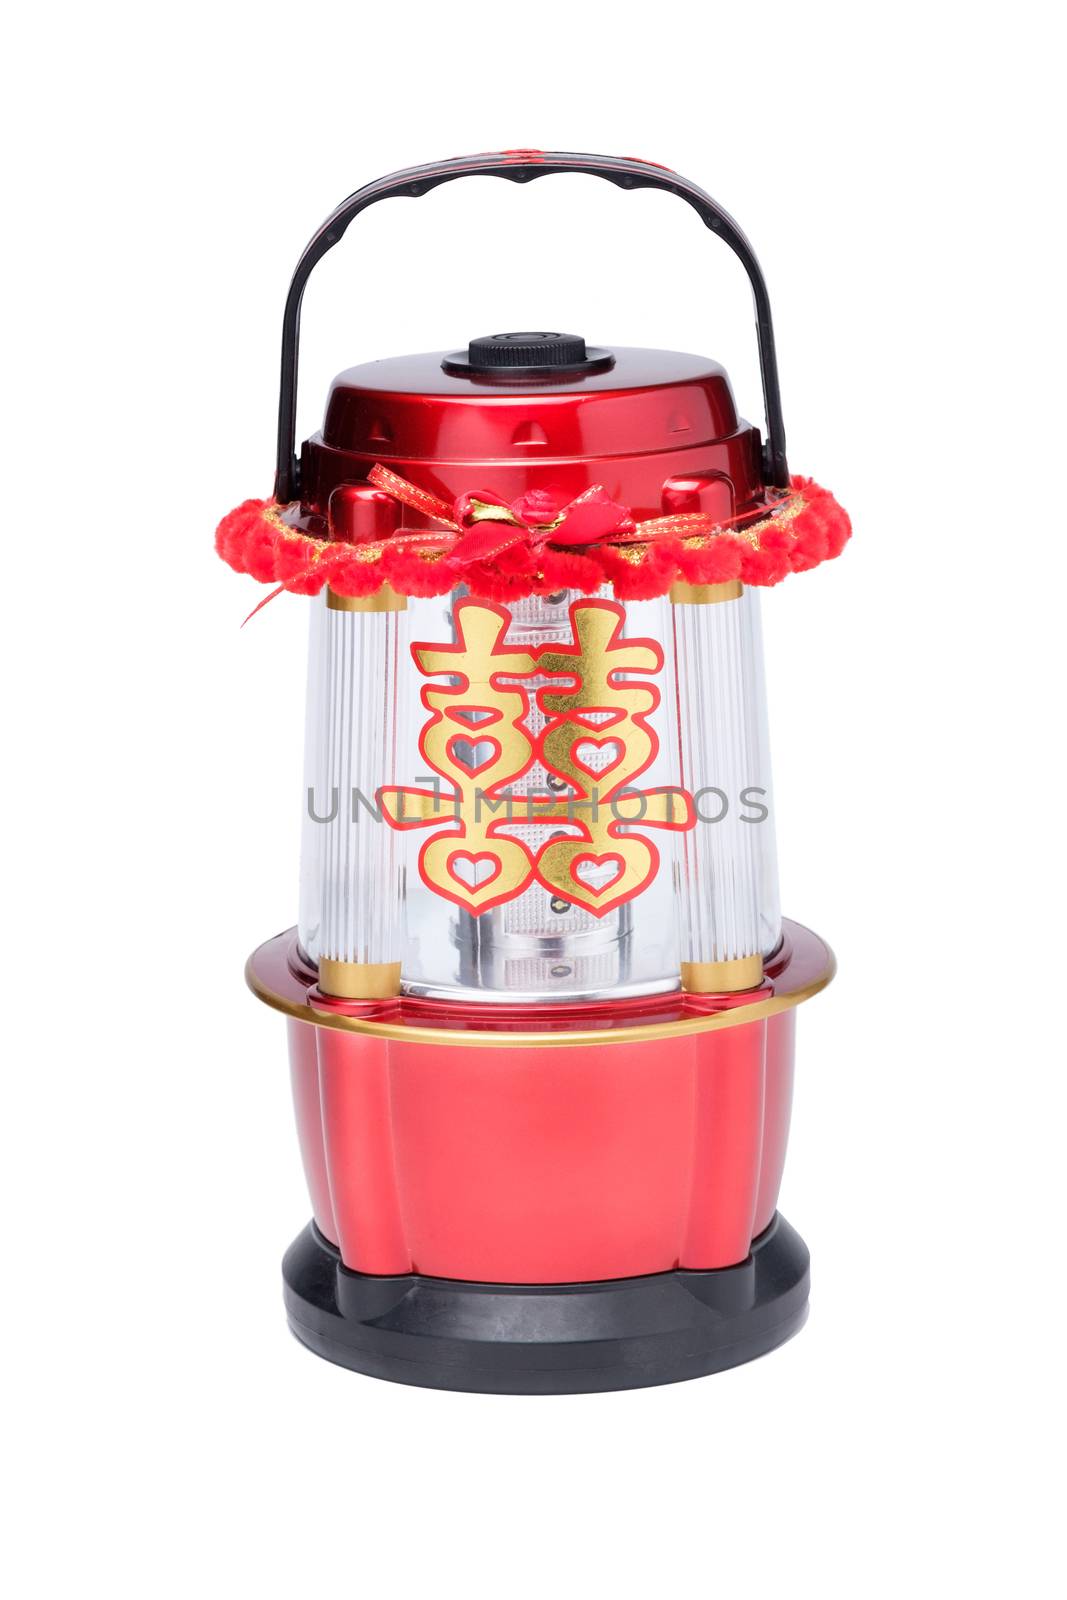 Chinese LED lantern lamp with Chinese double happiness symbol by zneb076